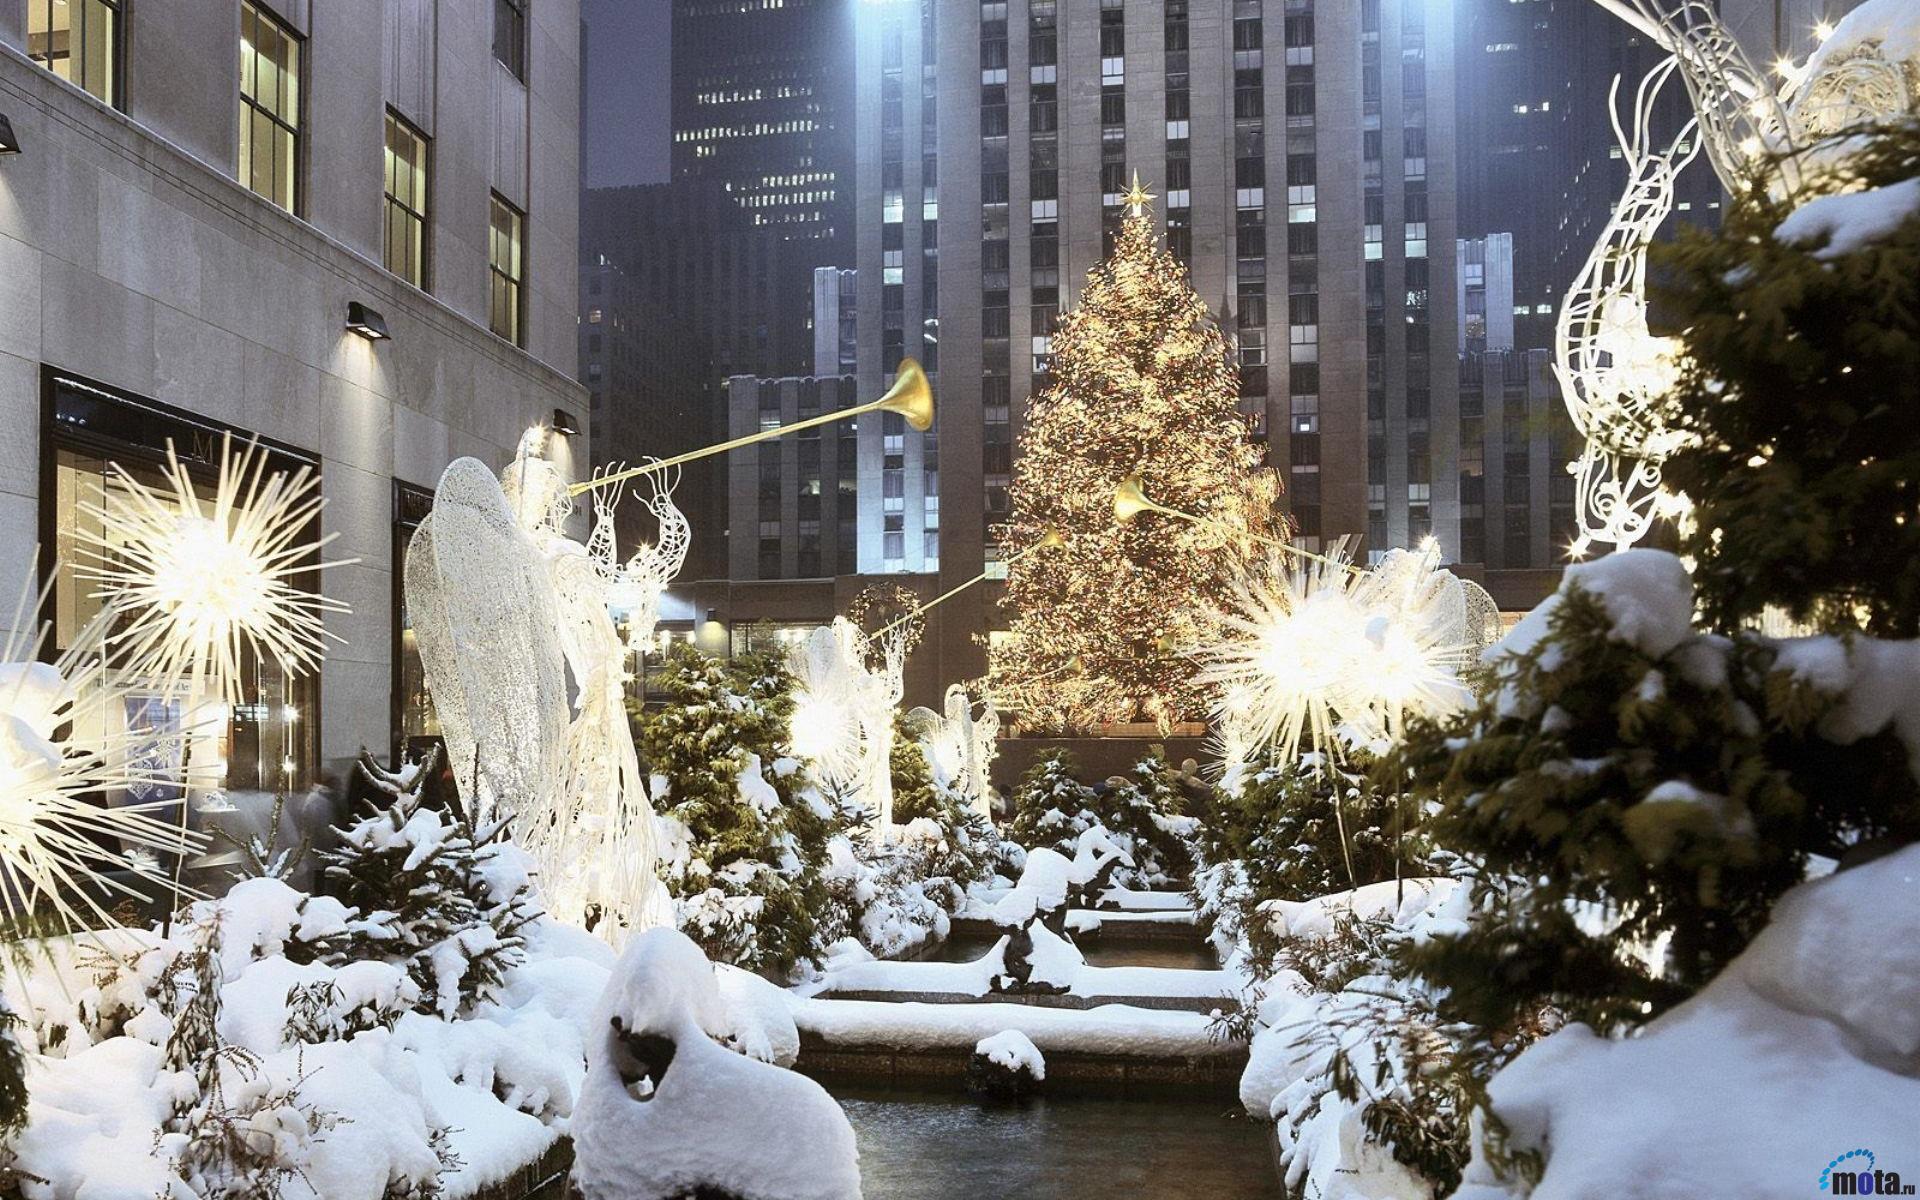 7 Of The Best Winter Christmas Destinations In The World